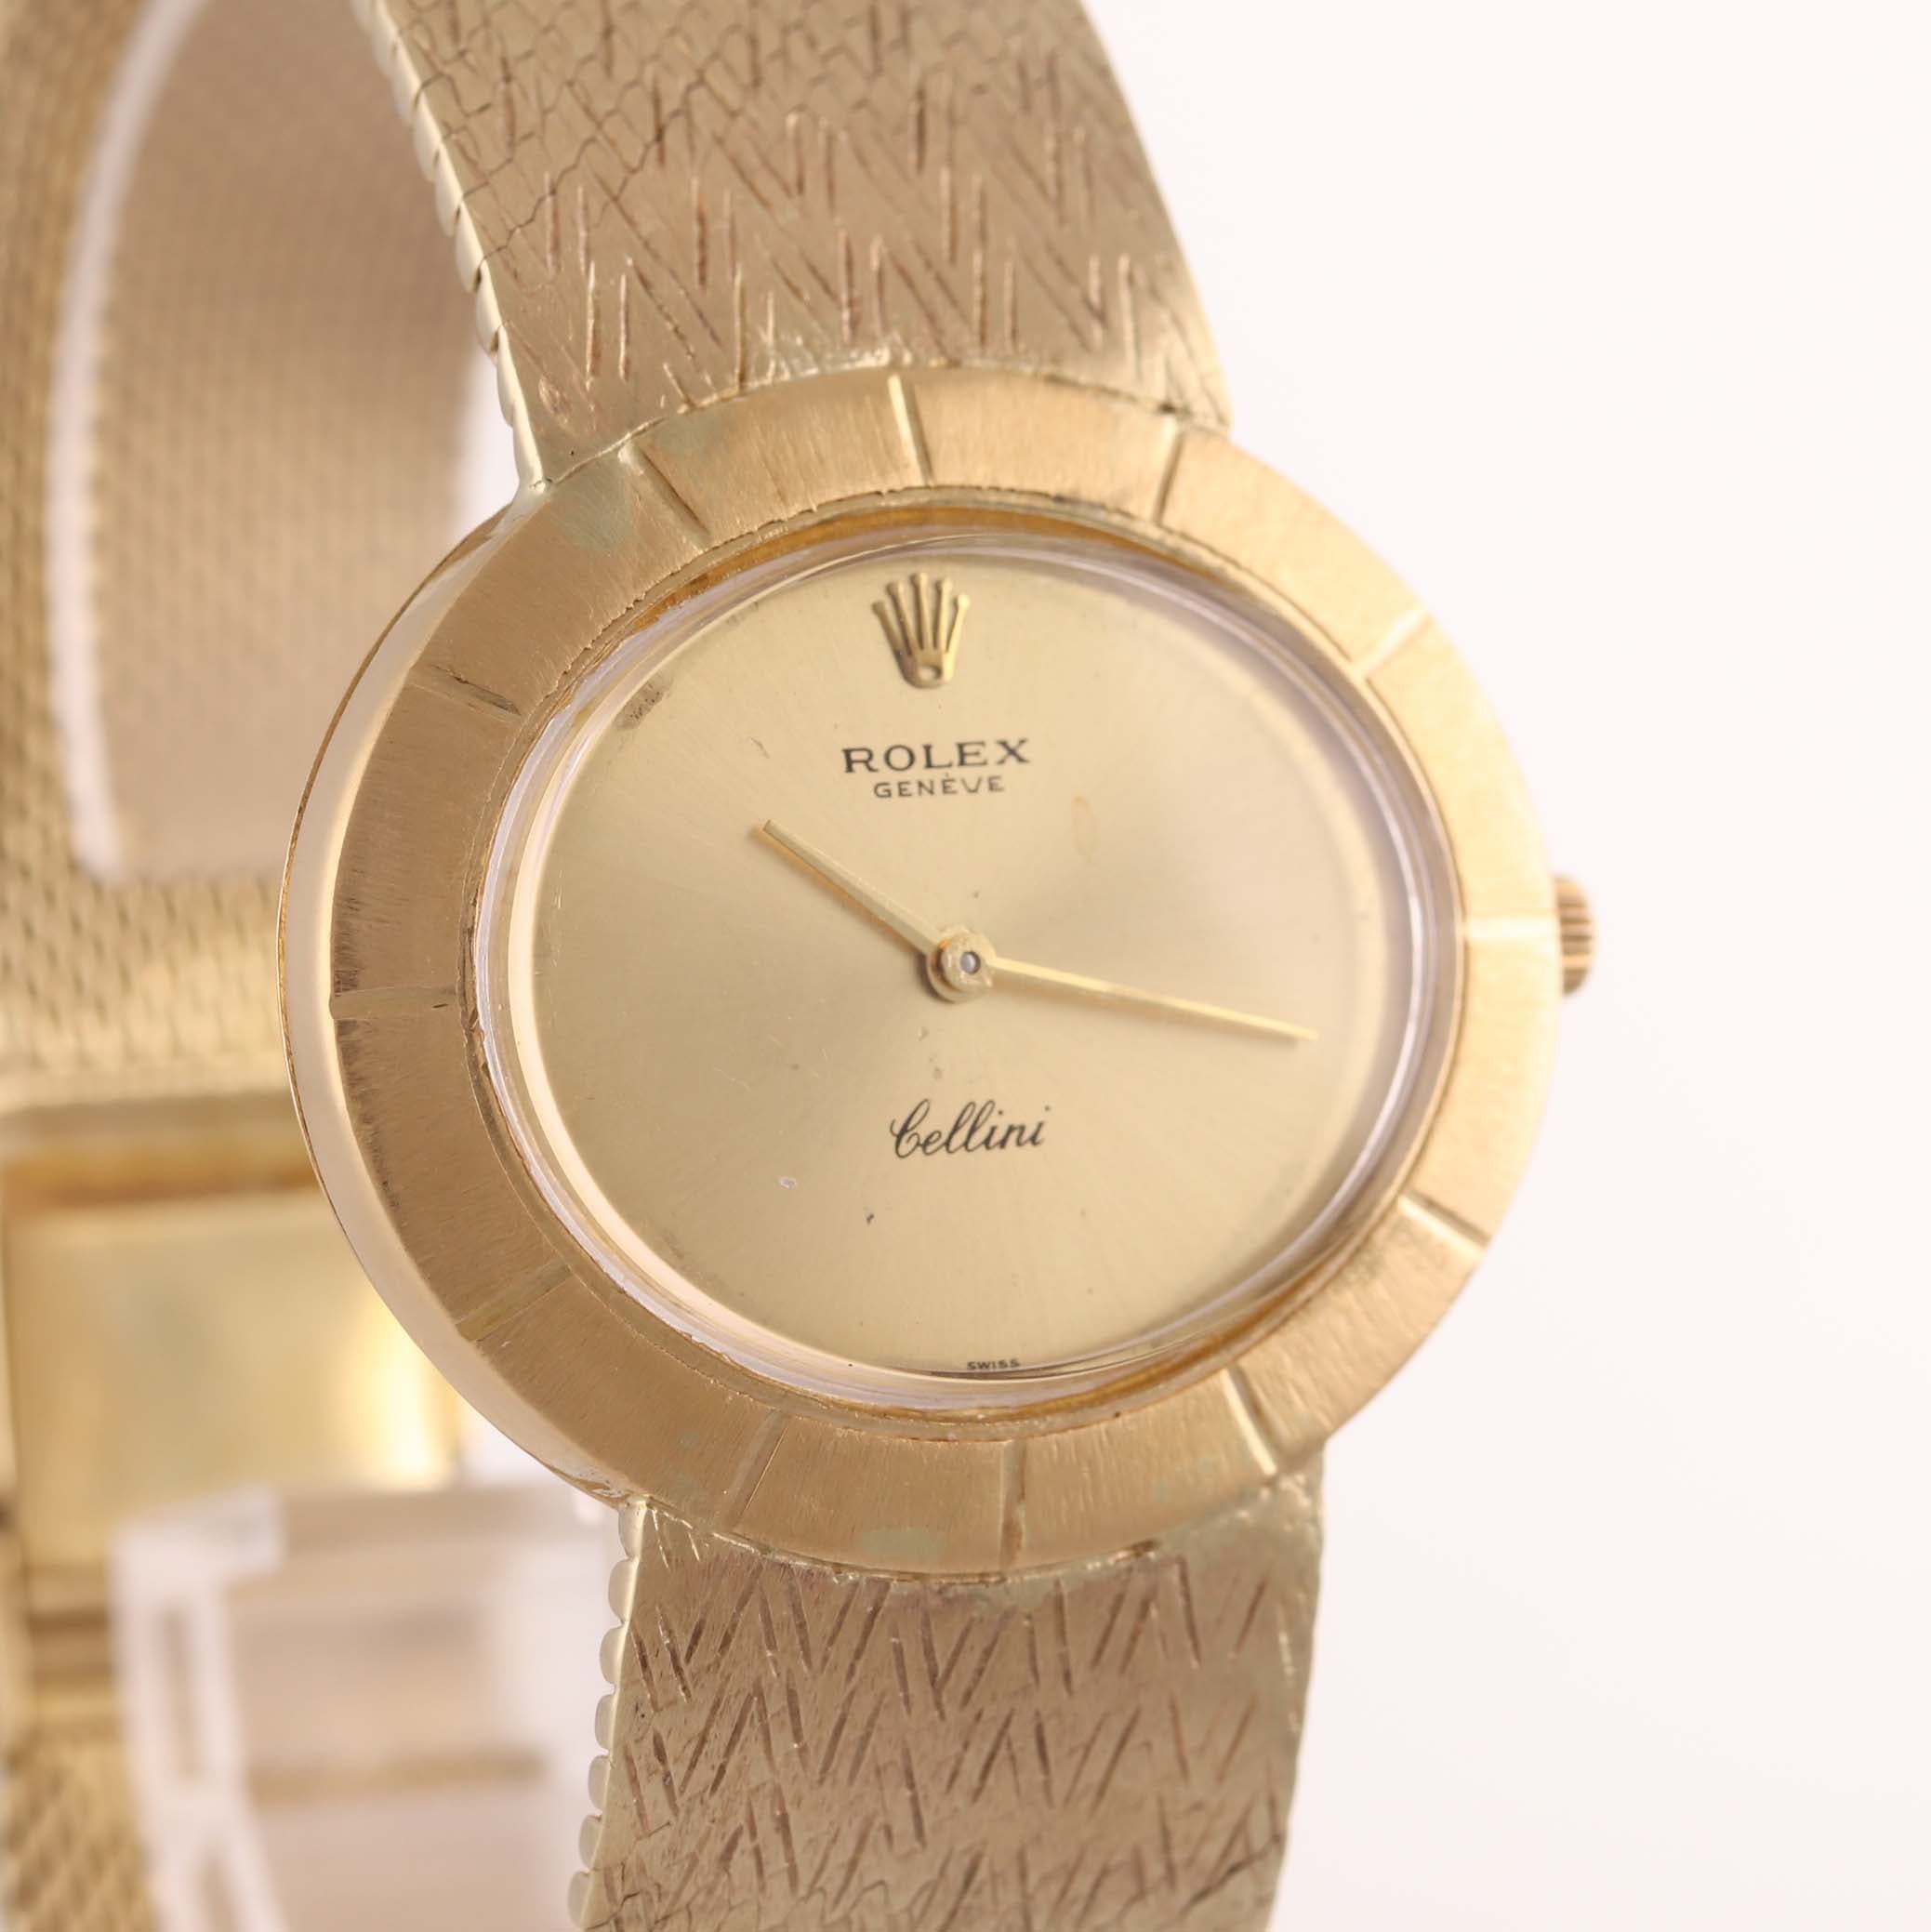 Ladies Vintage Rolex Geneve Cellini 14k Yellow Gold 33mm Champagne Dial Watch